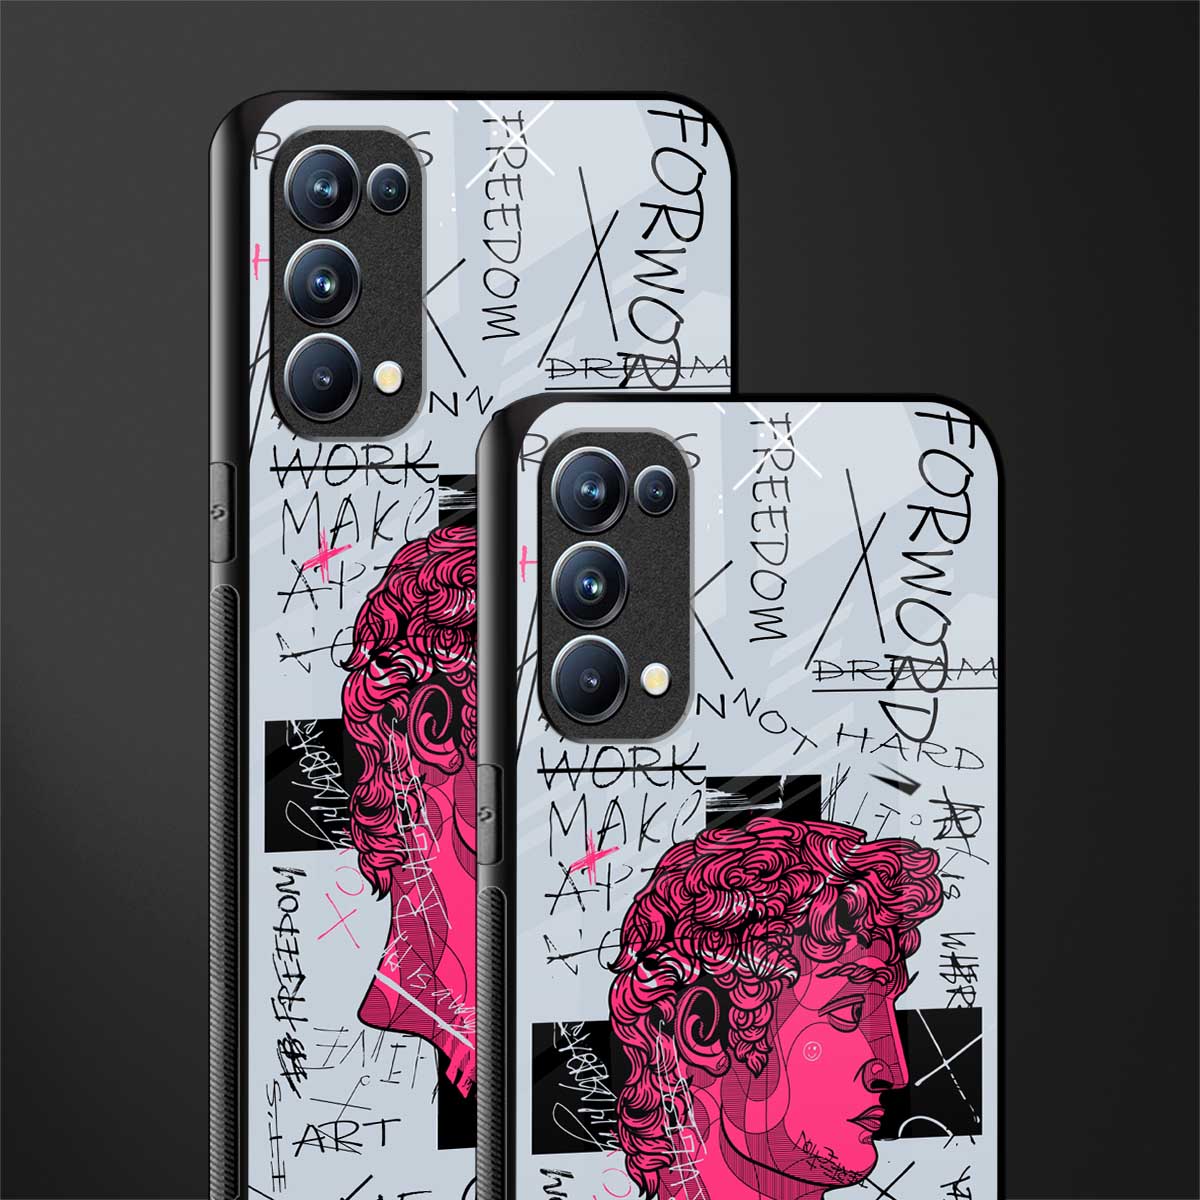 lost in reality david back phone cover | glass case for oppo reno 5